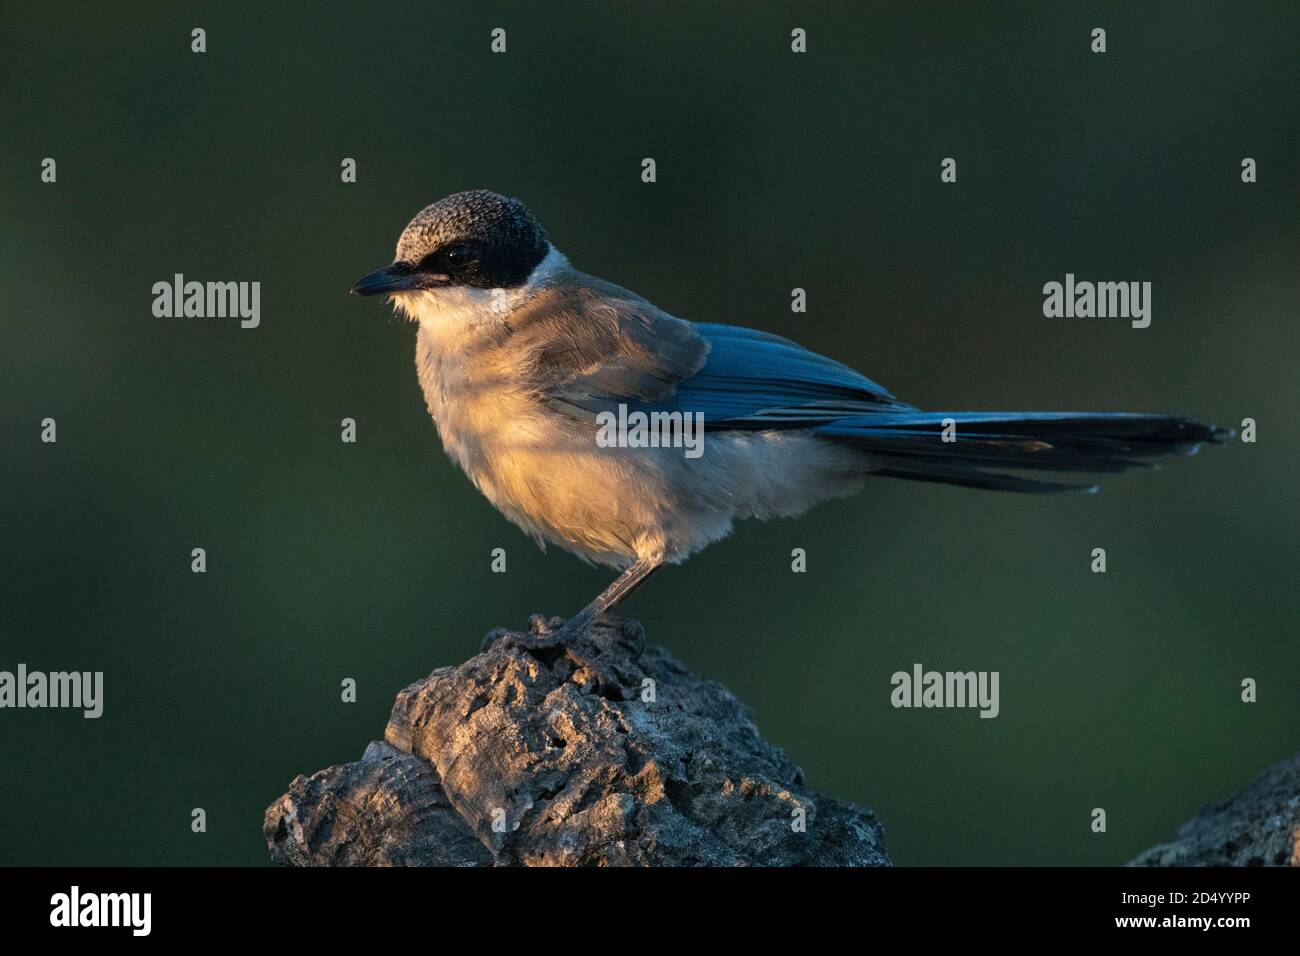 Iberian azure-winged magpie (Cyanopica cooki), Immature standing on a rock, Spain, Extremadura Stock Photo